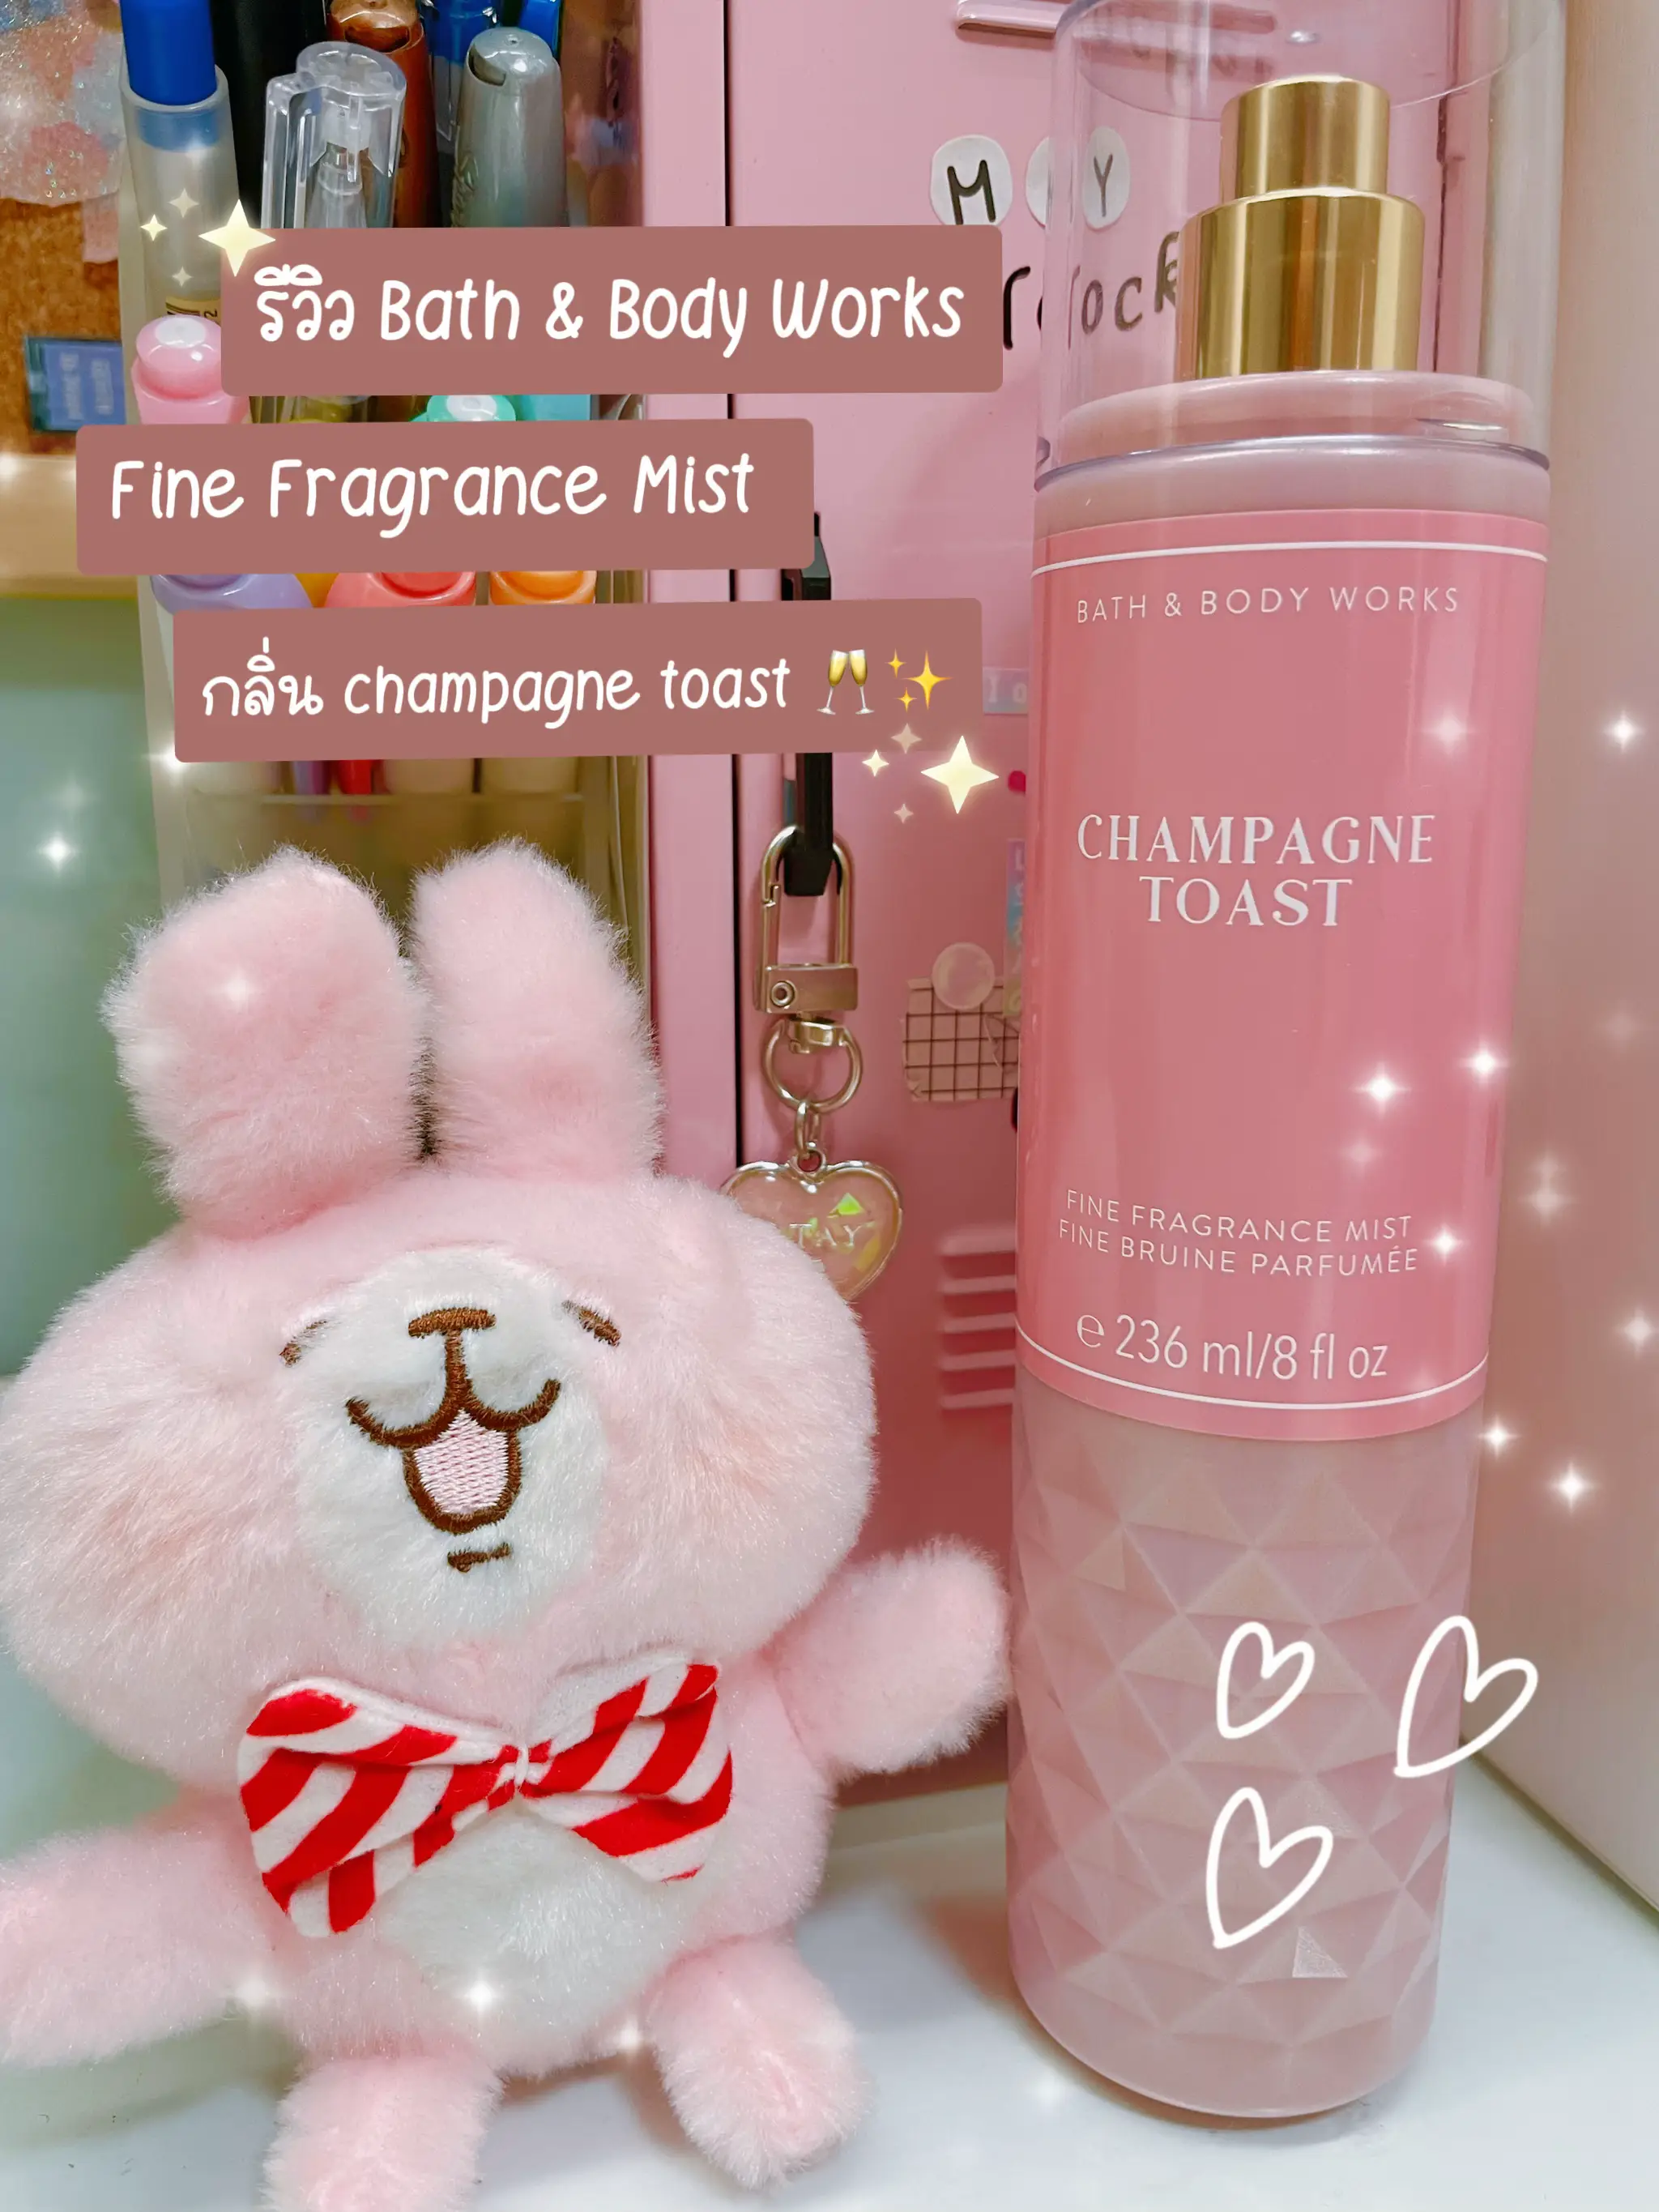 BATH & BODY WORKS CHAMPAGNE TOAST COLLECTION REVIEW 